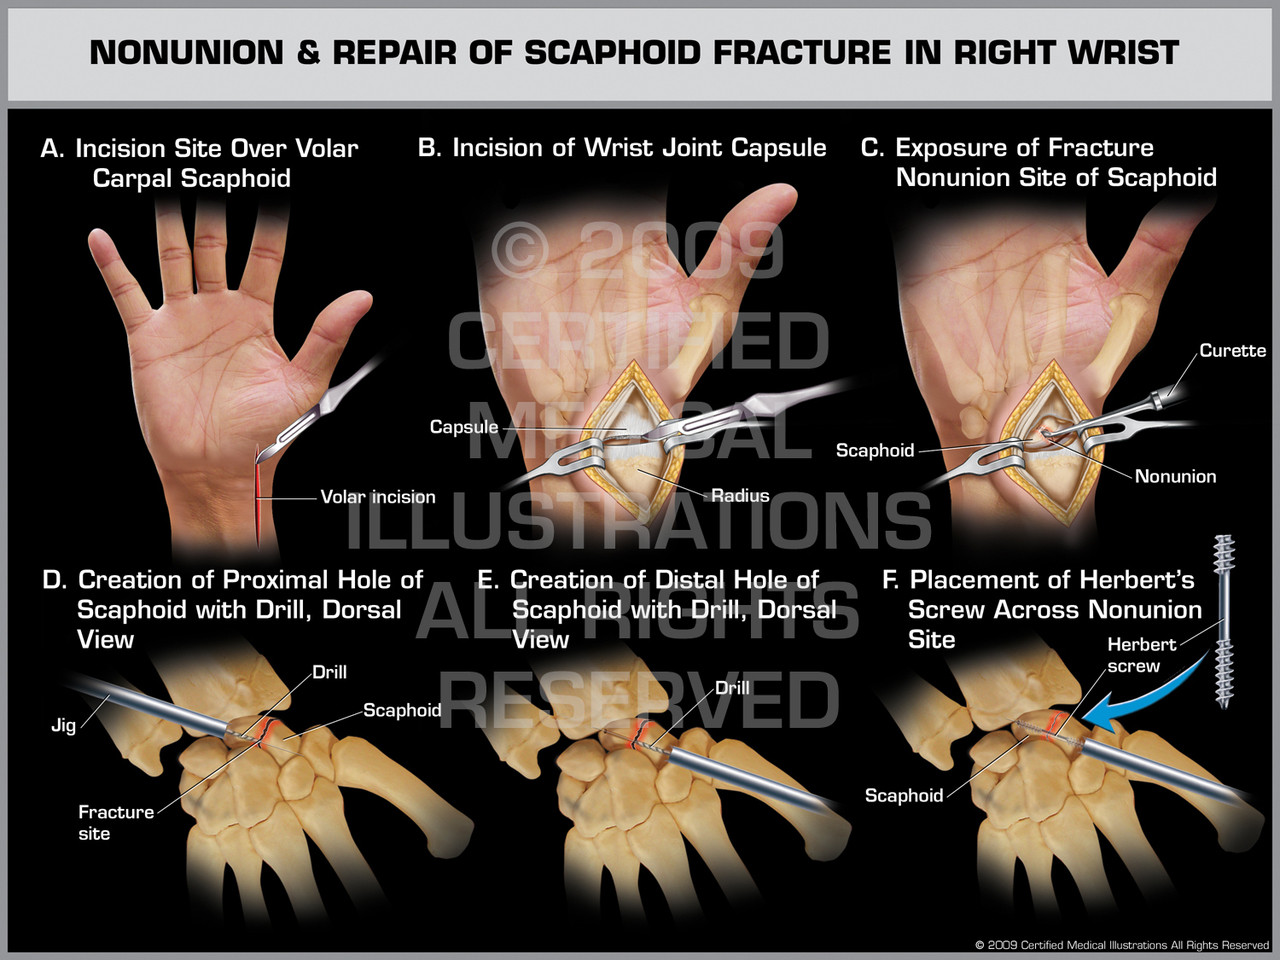 [Surgery for Pseudarthrosis of the Scaphoid Bone Performed in Hungary ], A scaphoid pseudarthrosis